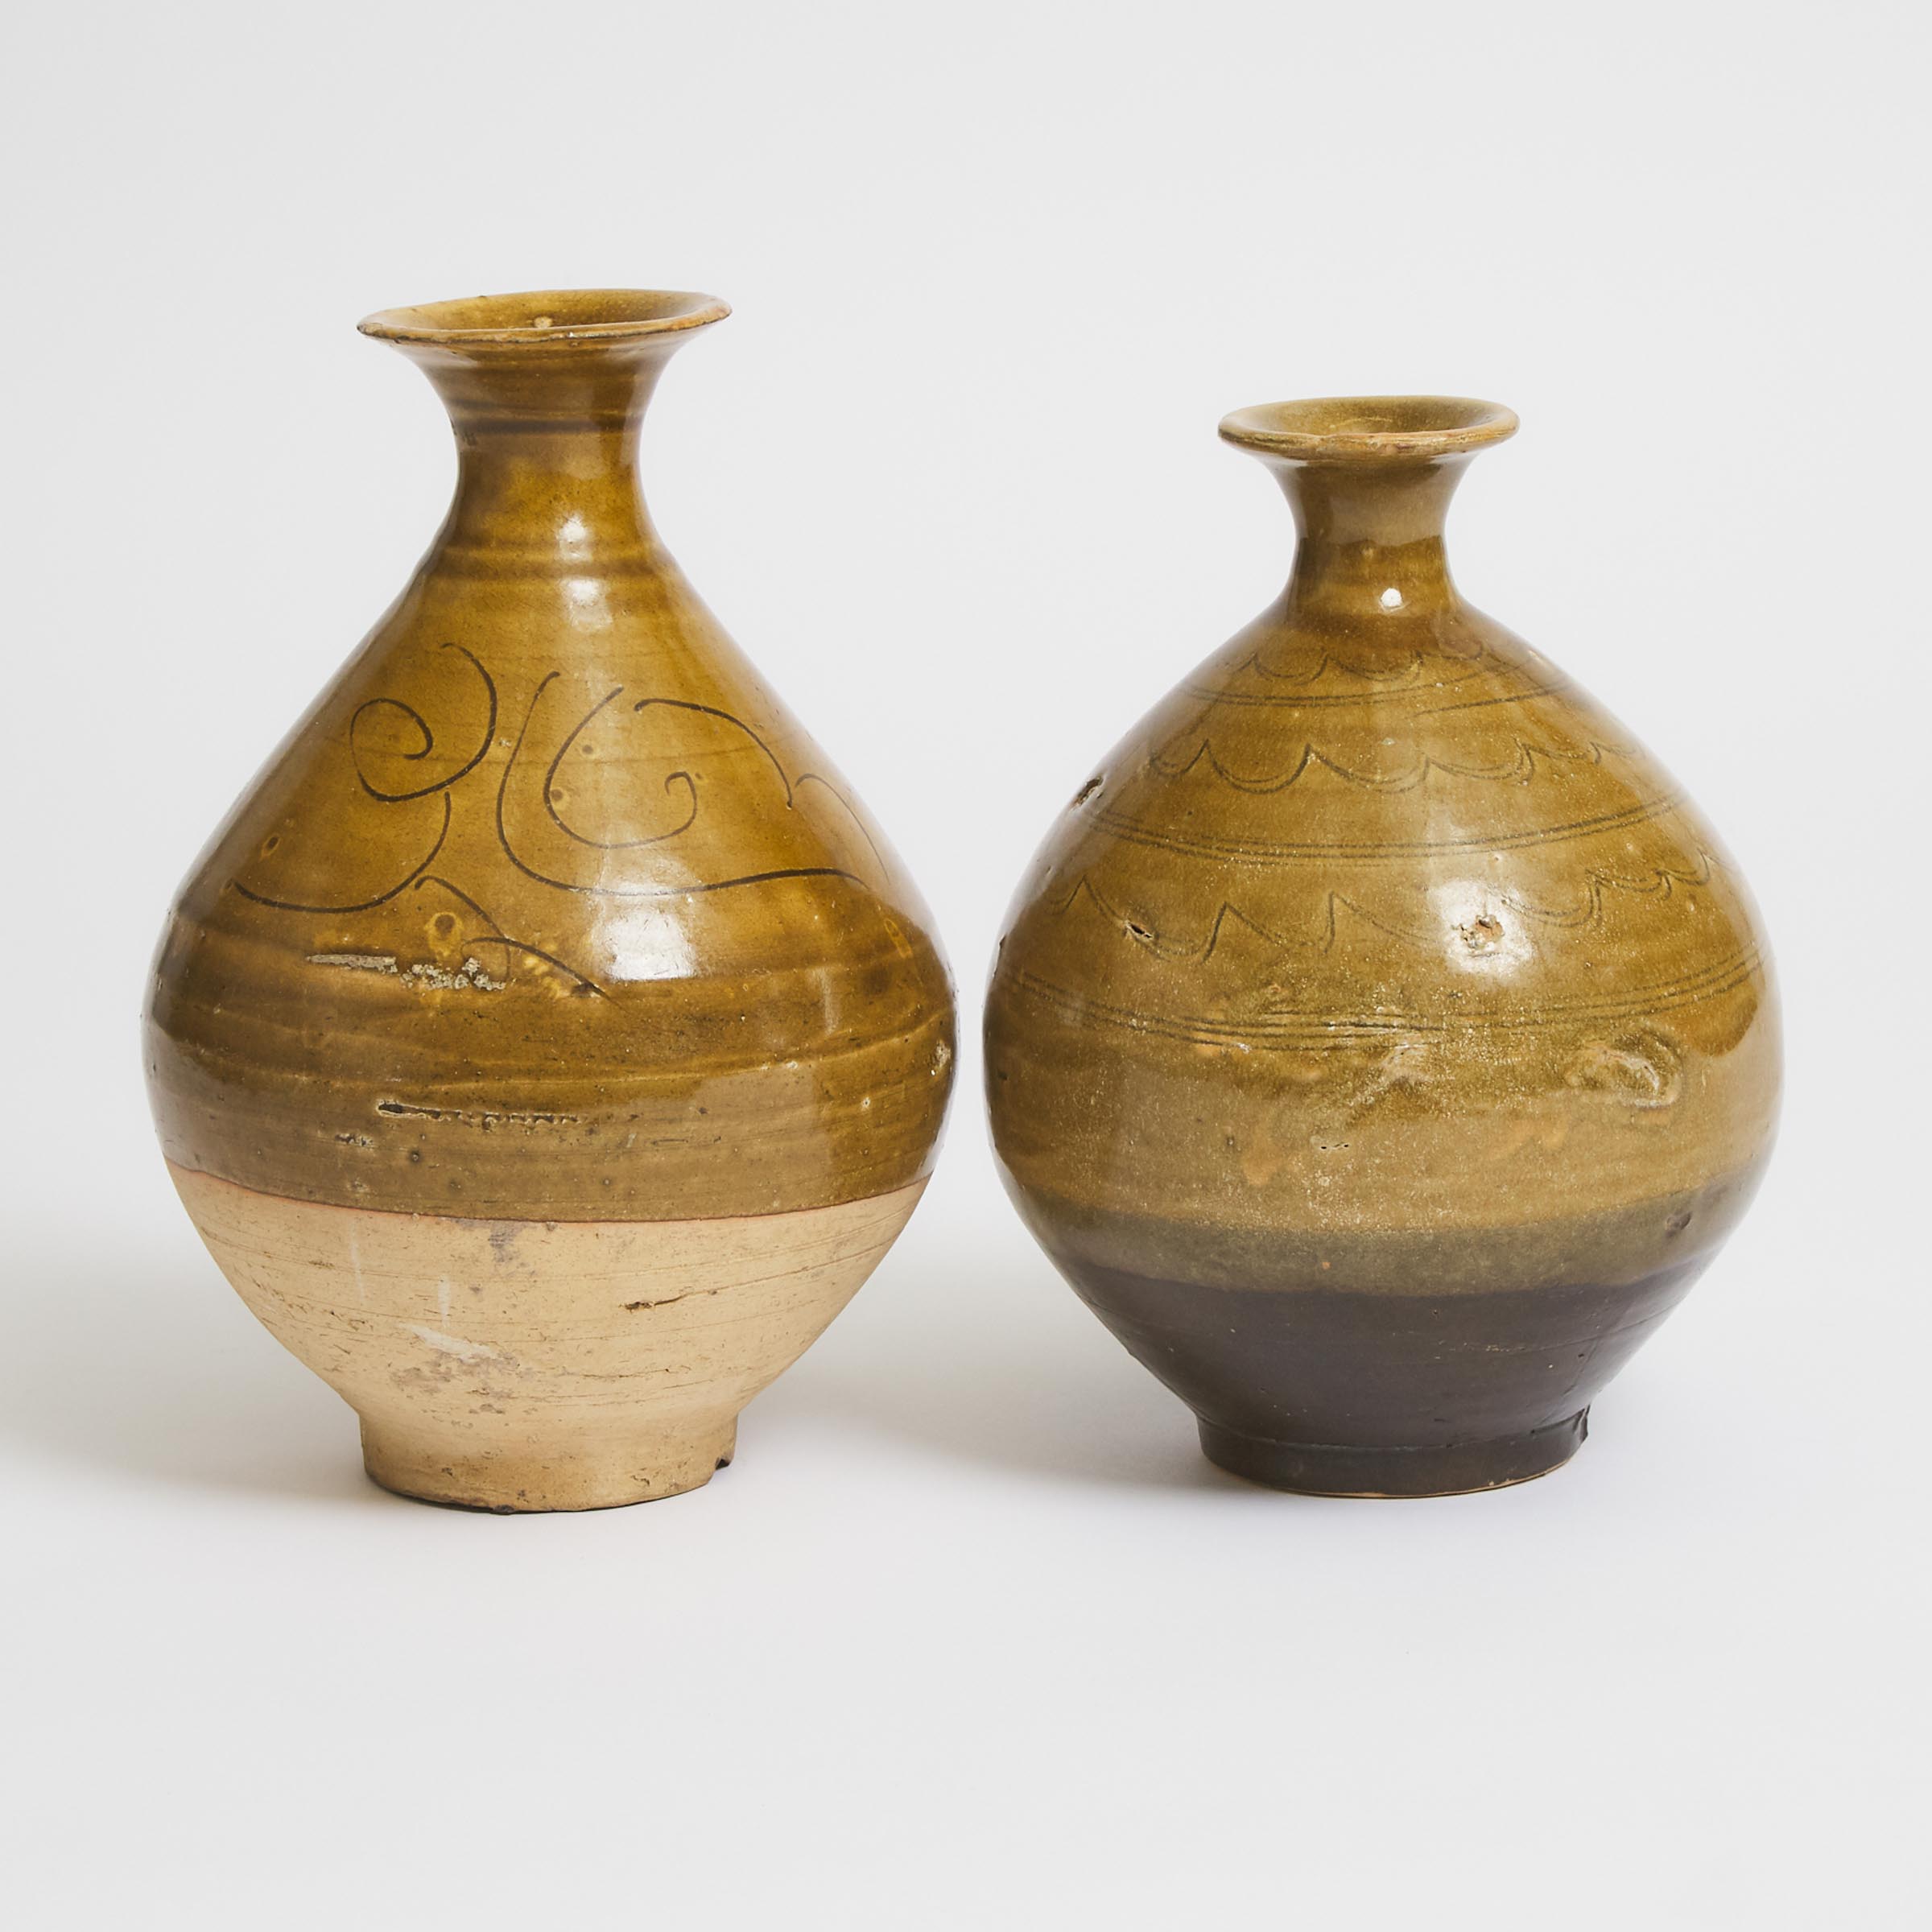 Two Pear-Shaped Bottle Vases, Yuan Dynasty or Later